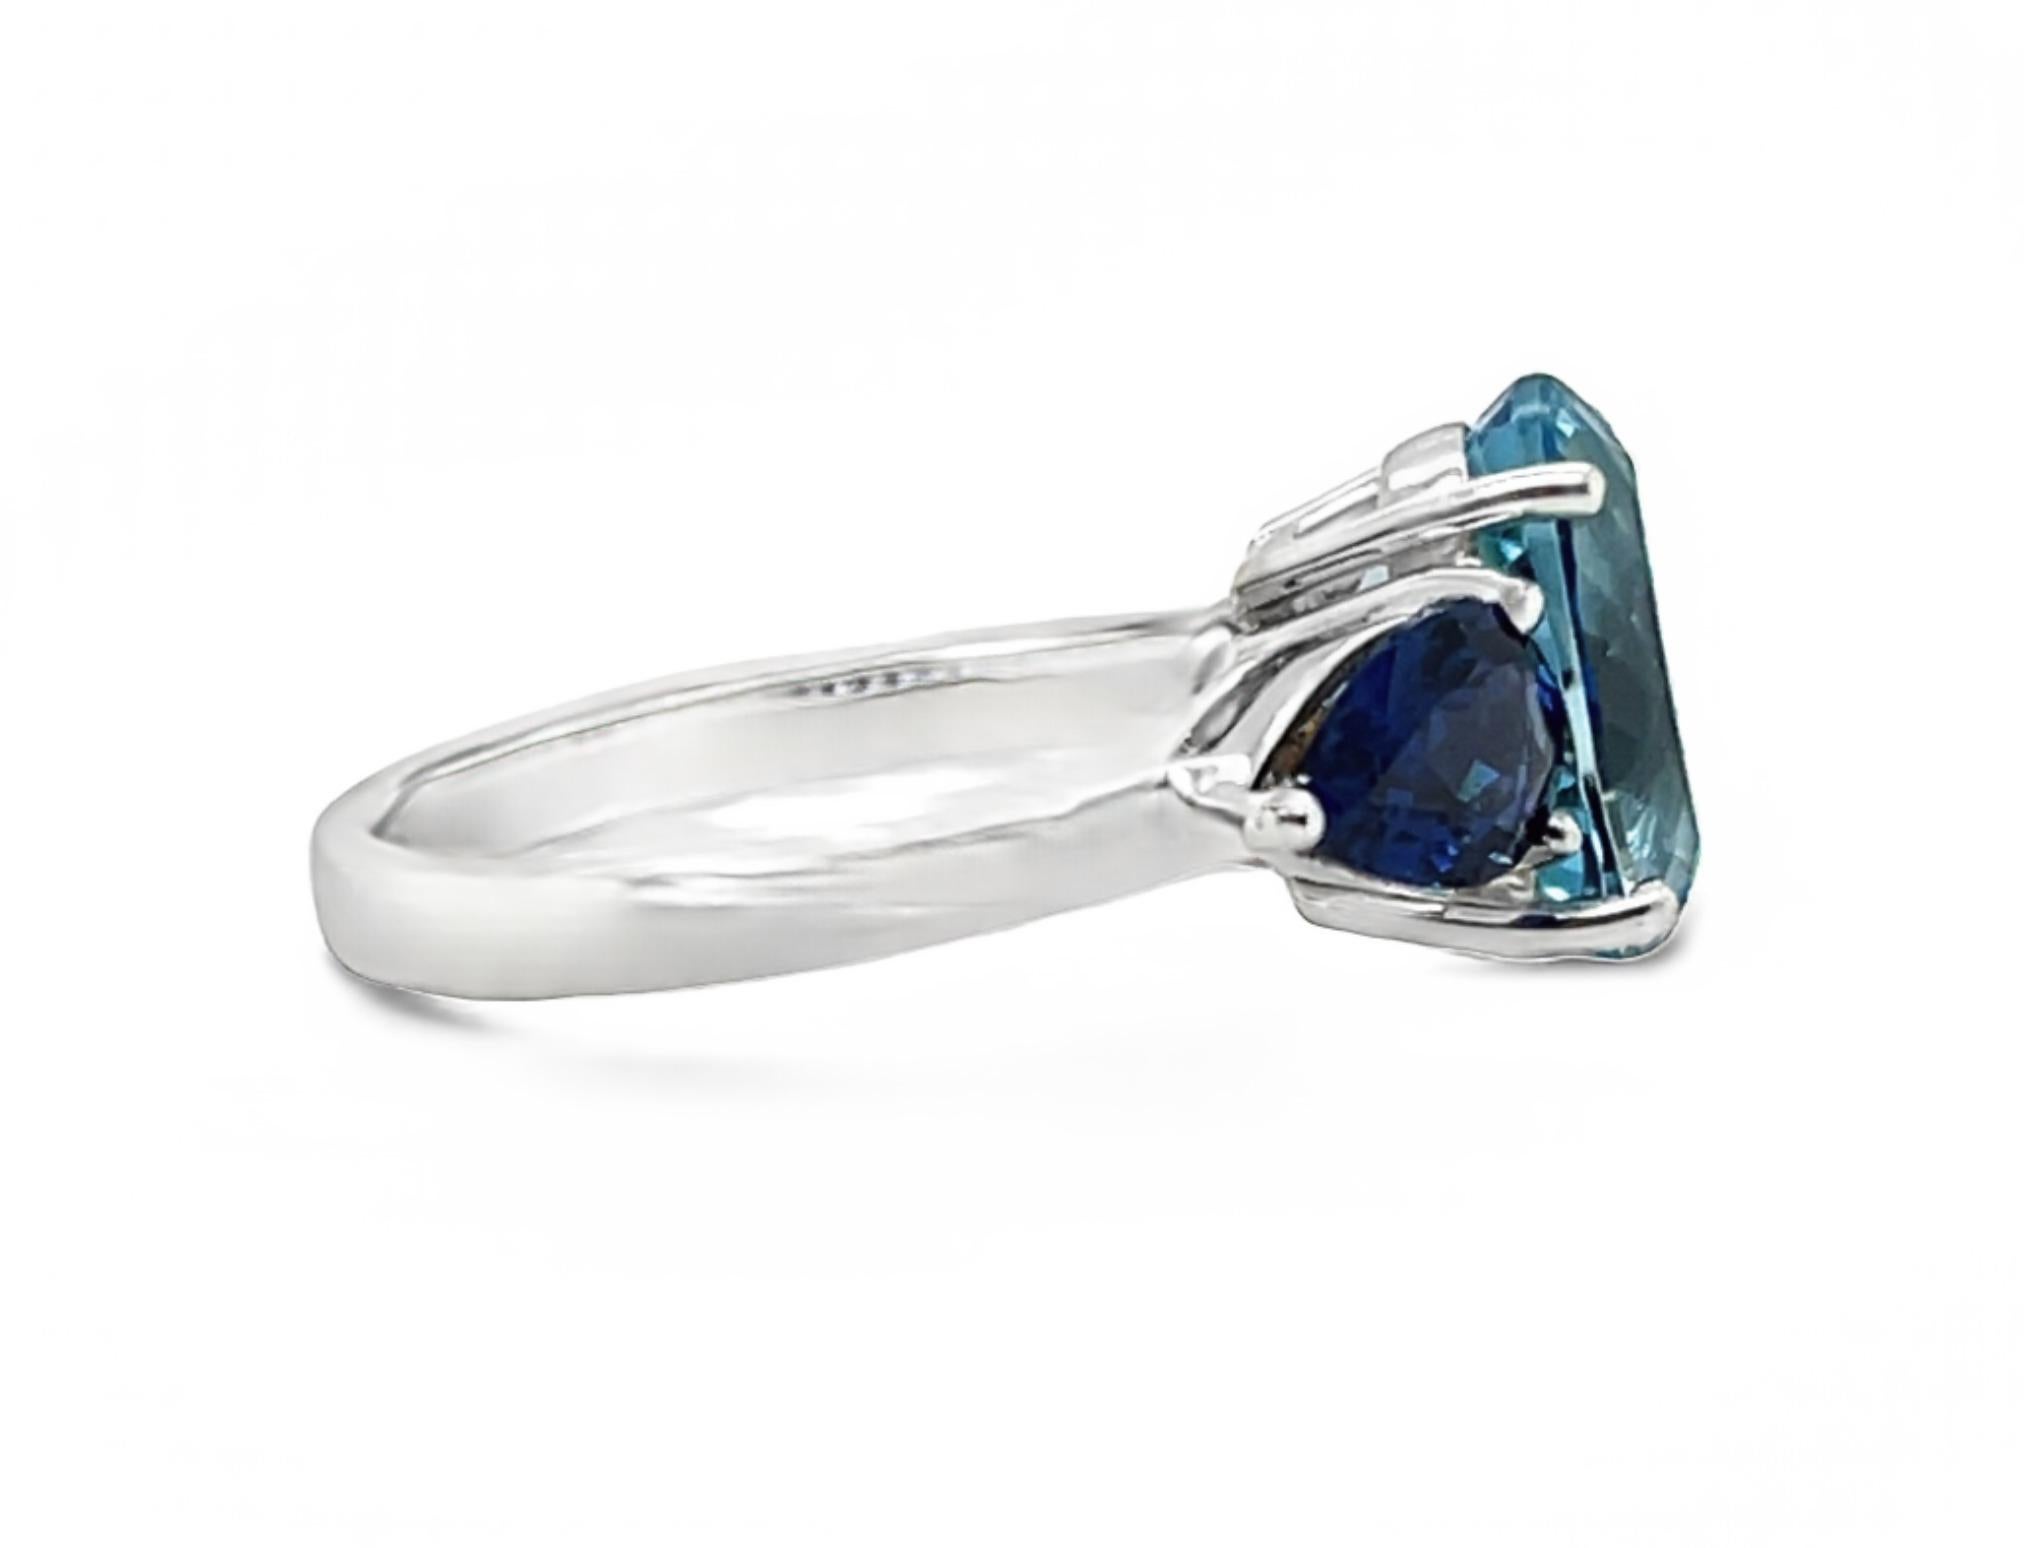 Oval Cut Aquamarine and Blue Sapphire Three-Stone Ring, 3.53 Carats in White Gold